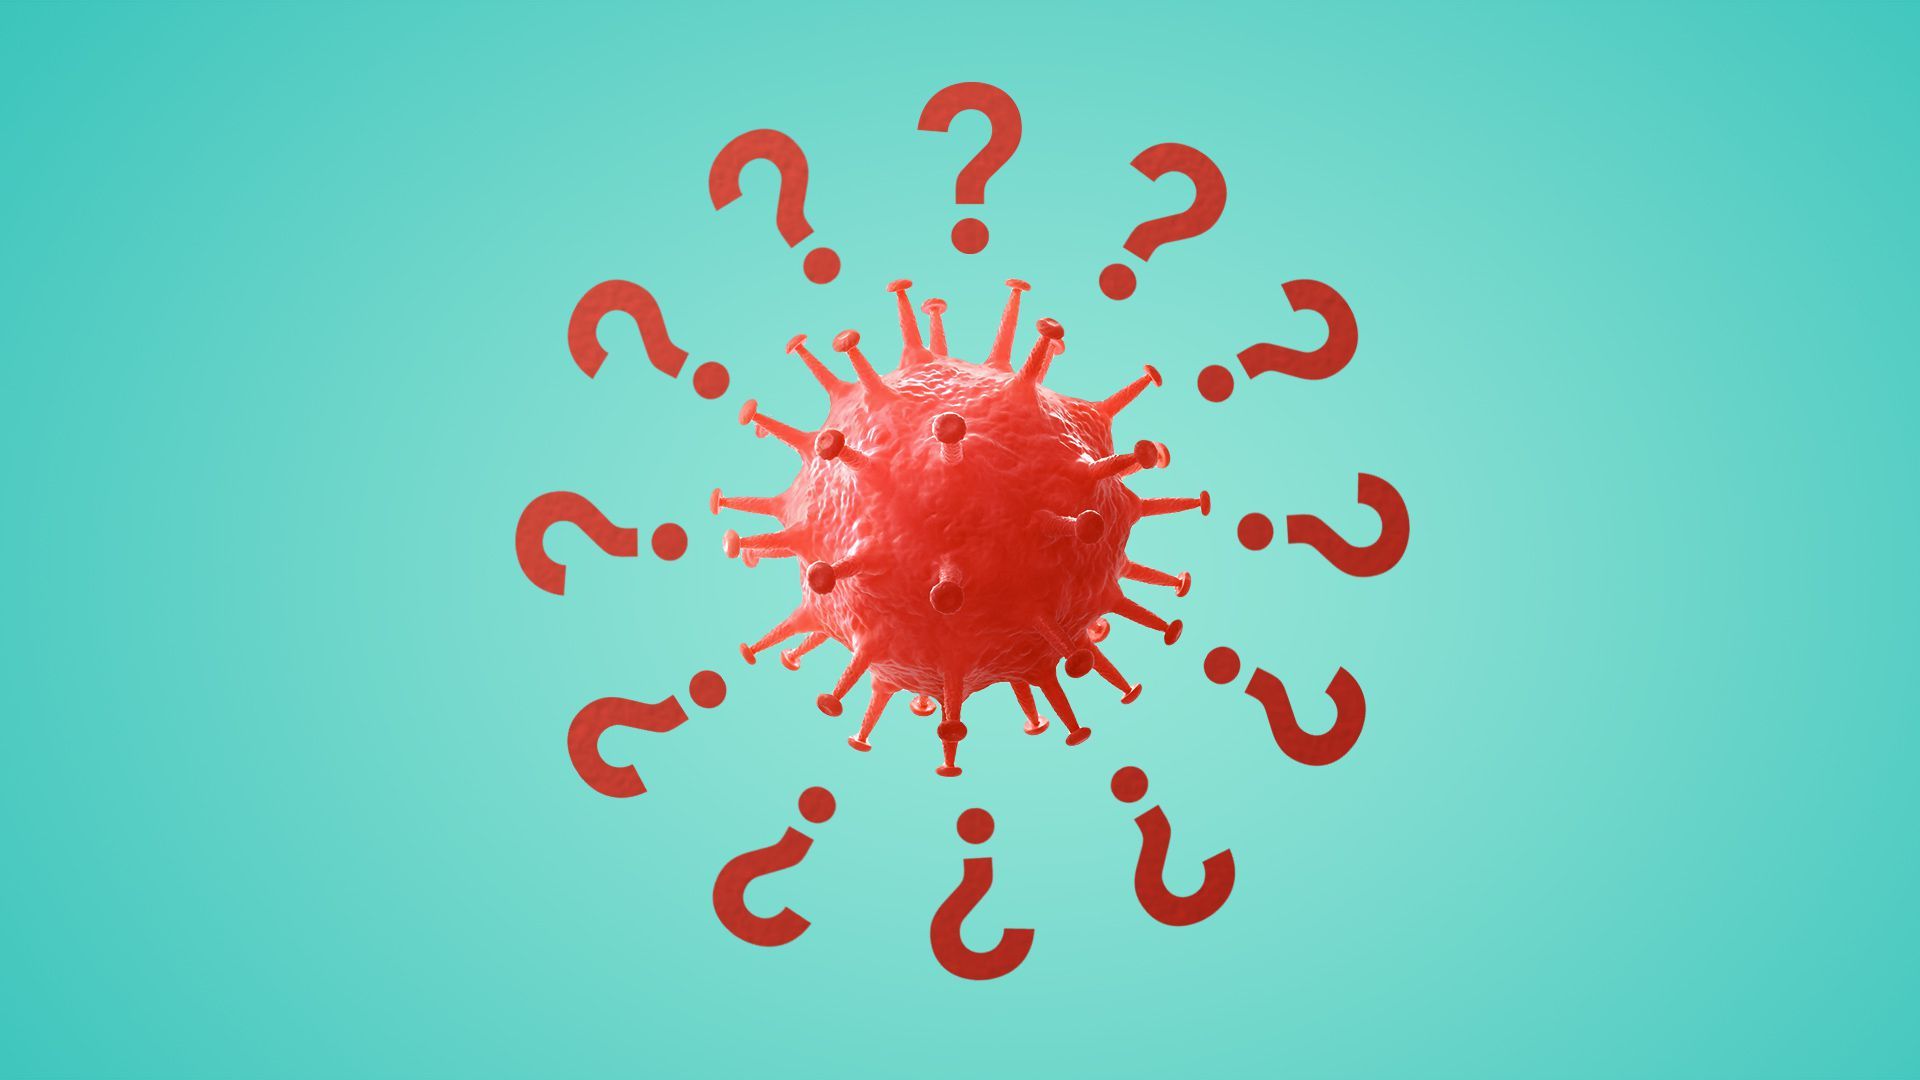 Illustration of a virus cell surrounded by question marks